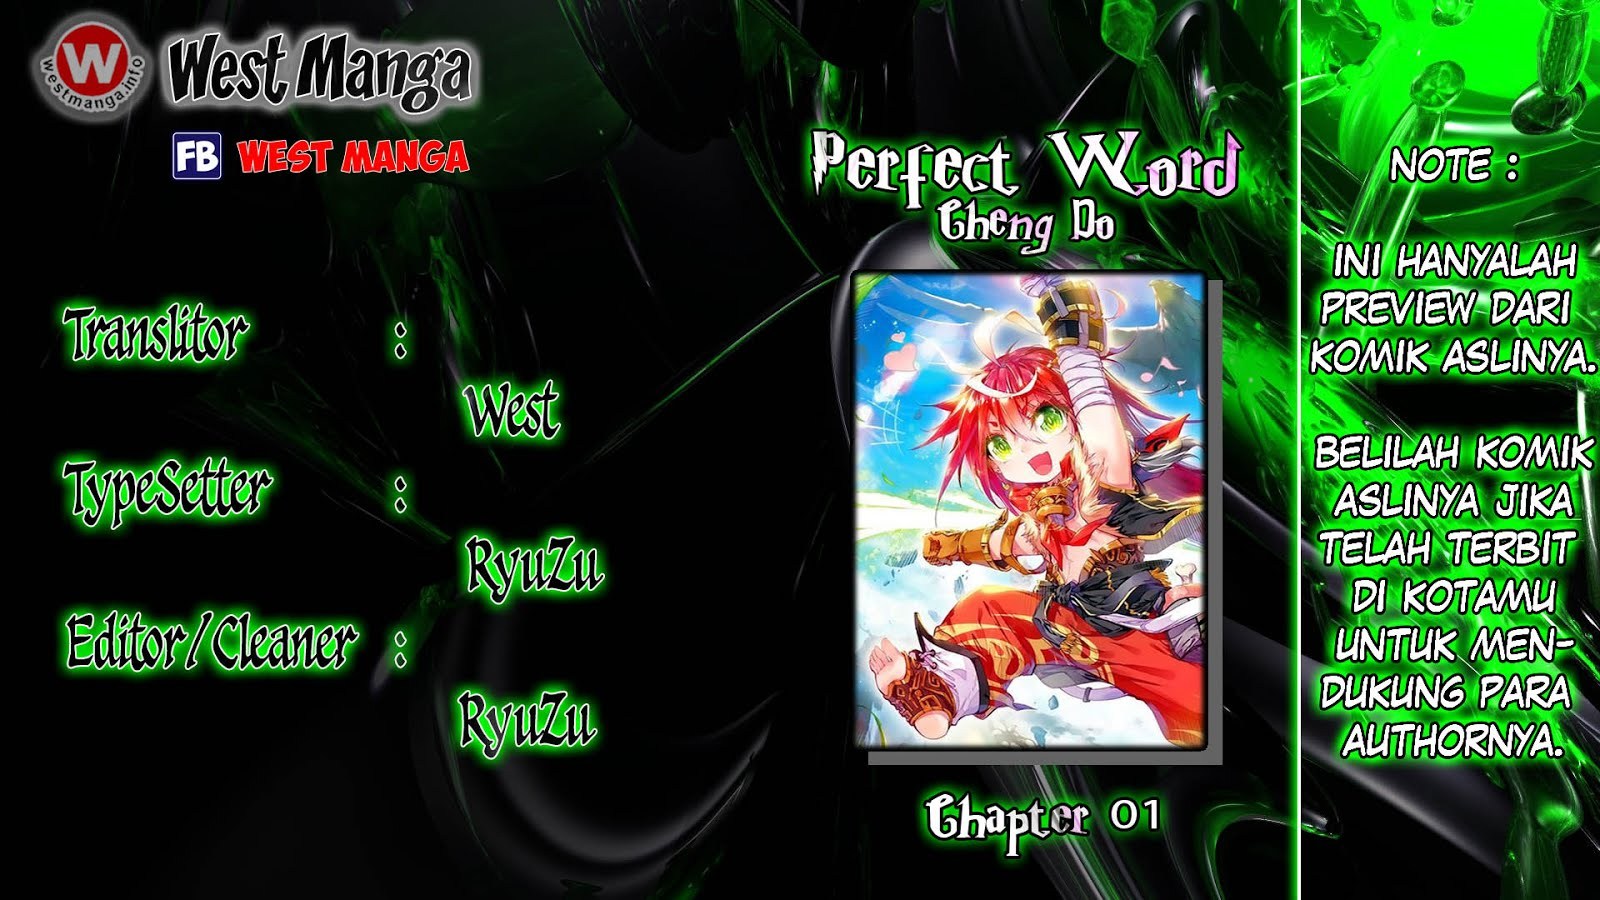 Perfect World Chapter 01